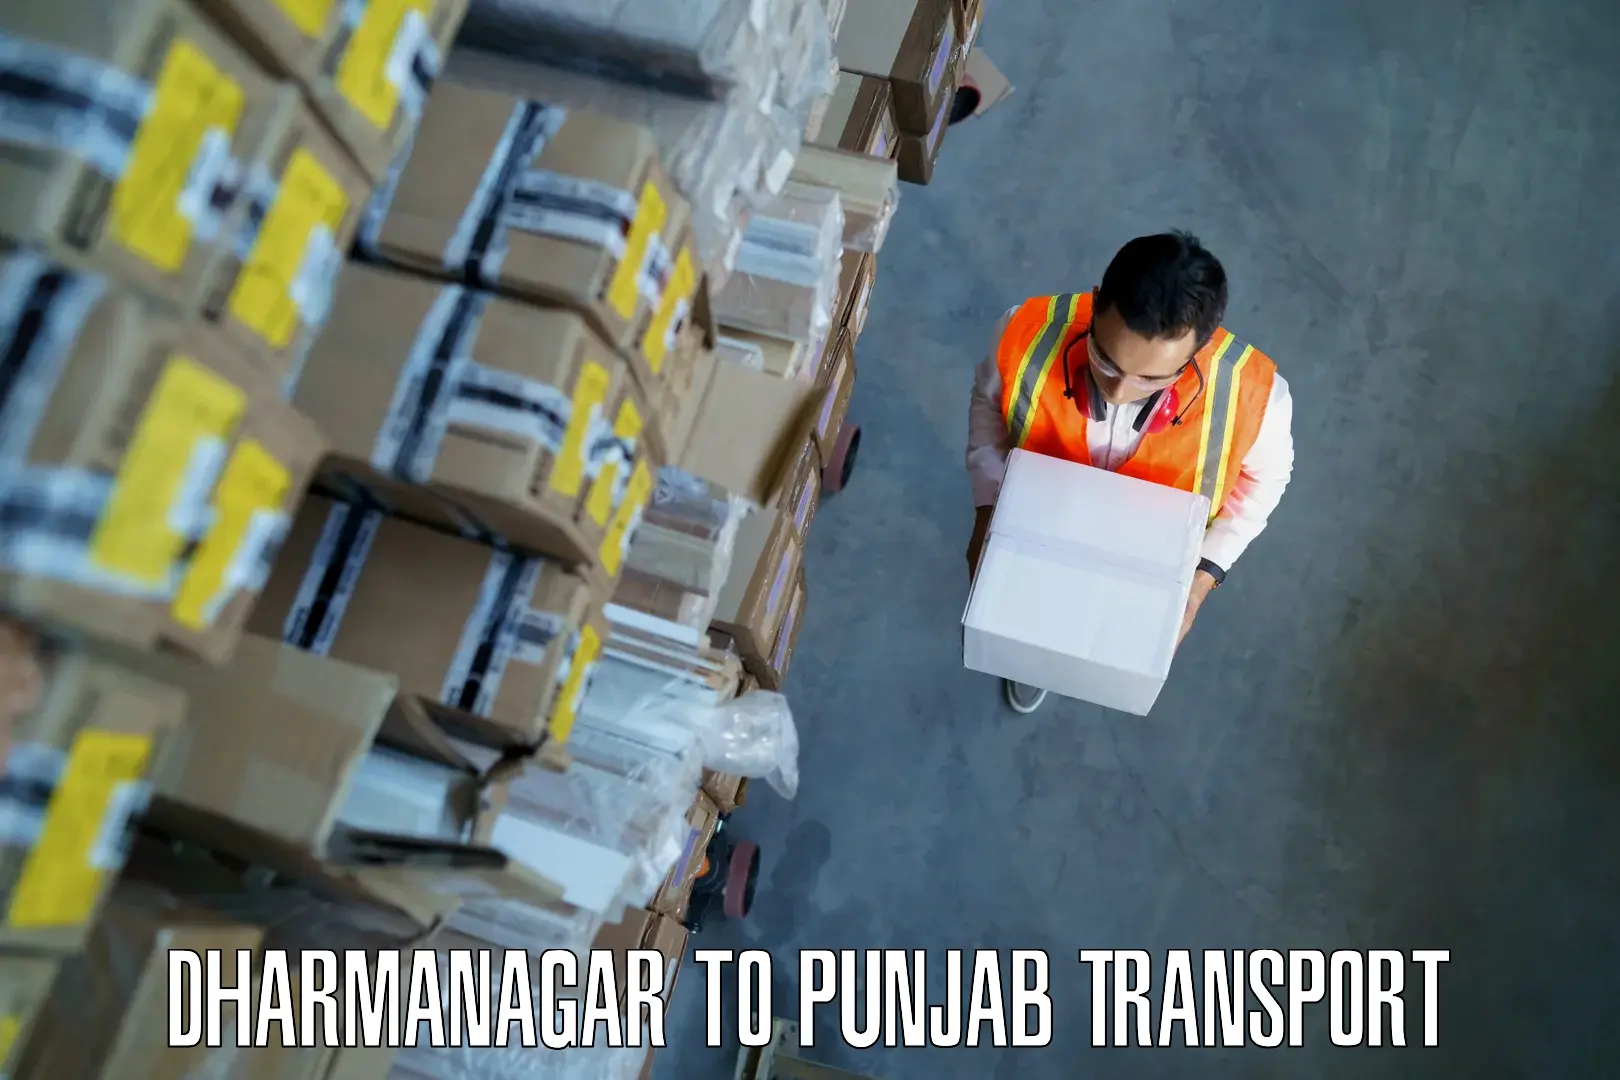 Container transport service Dharmanagar to Amritsar